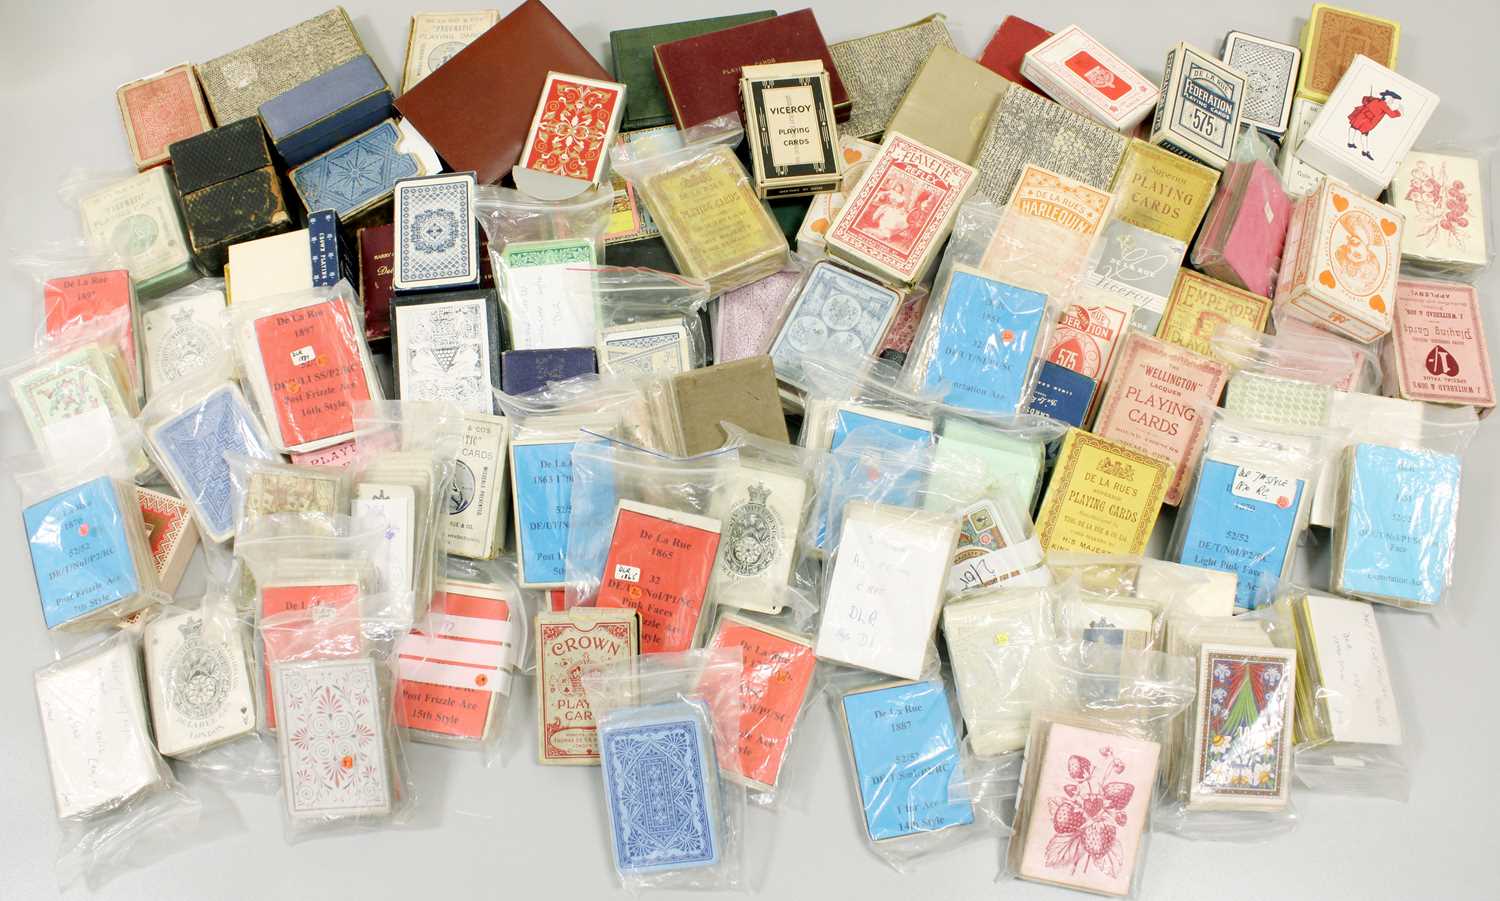 Lot 44 - Playing Cards - De La Rue. A large collection...